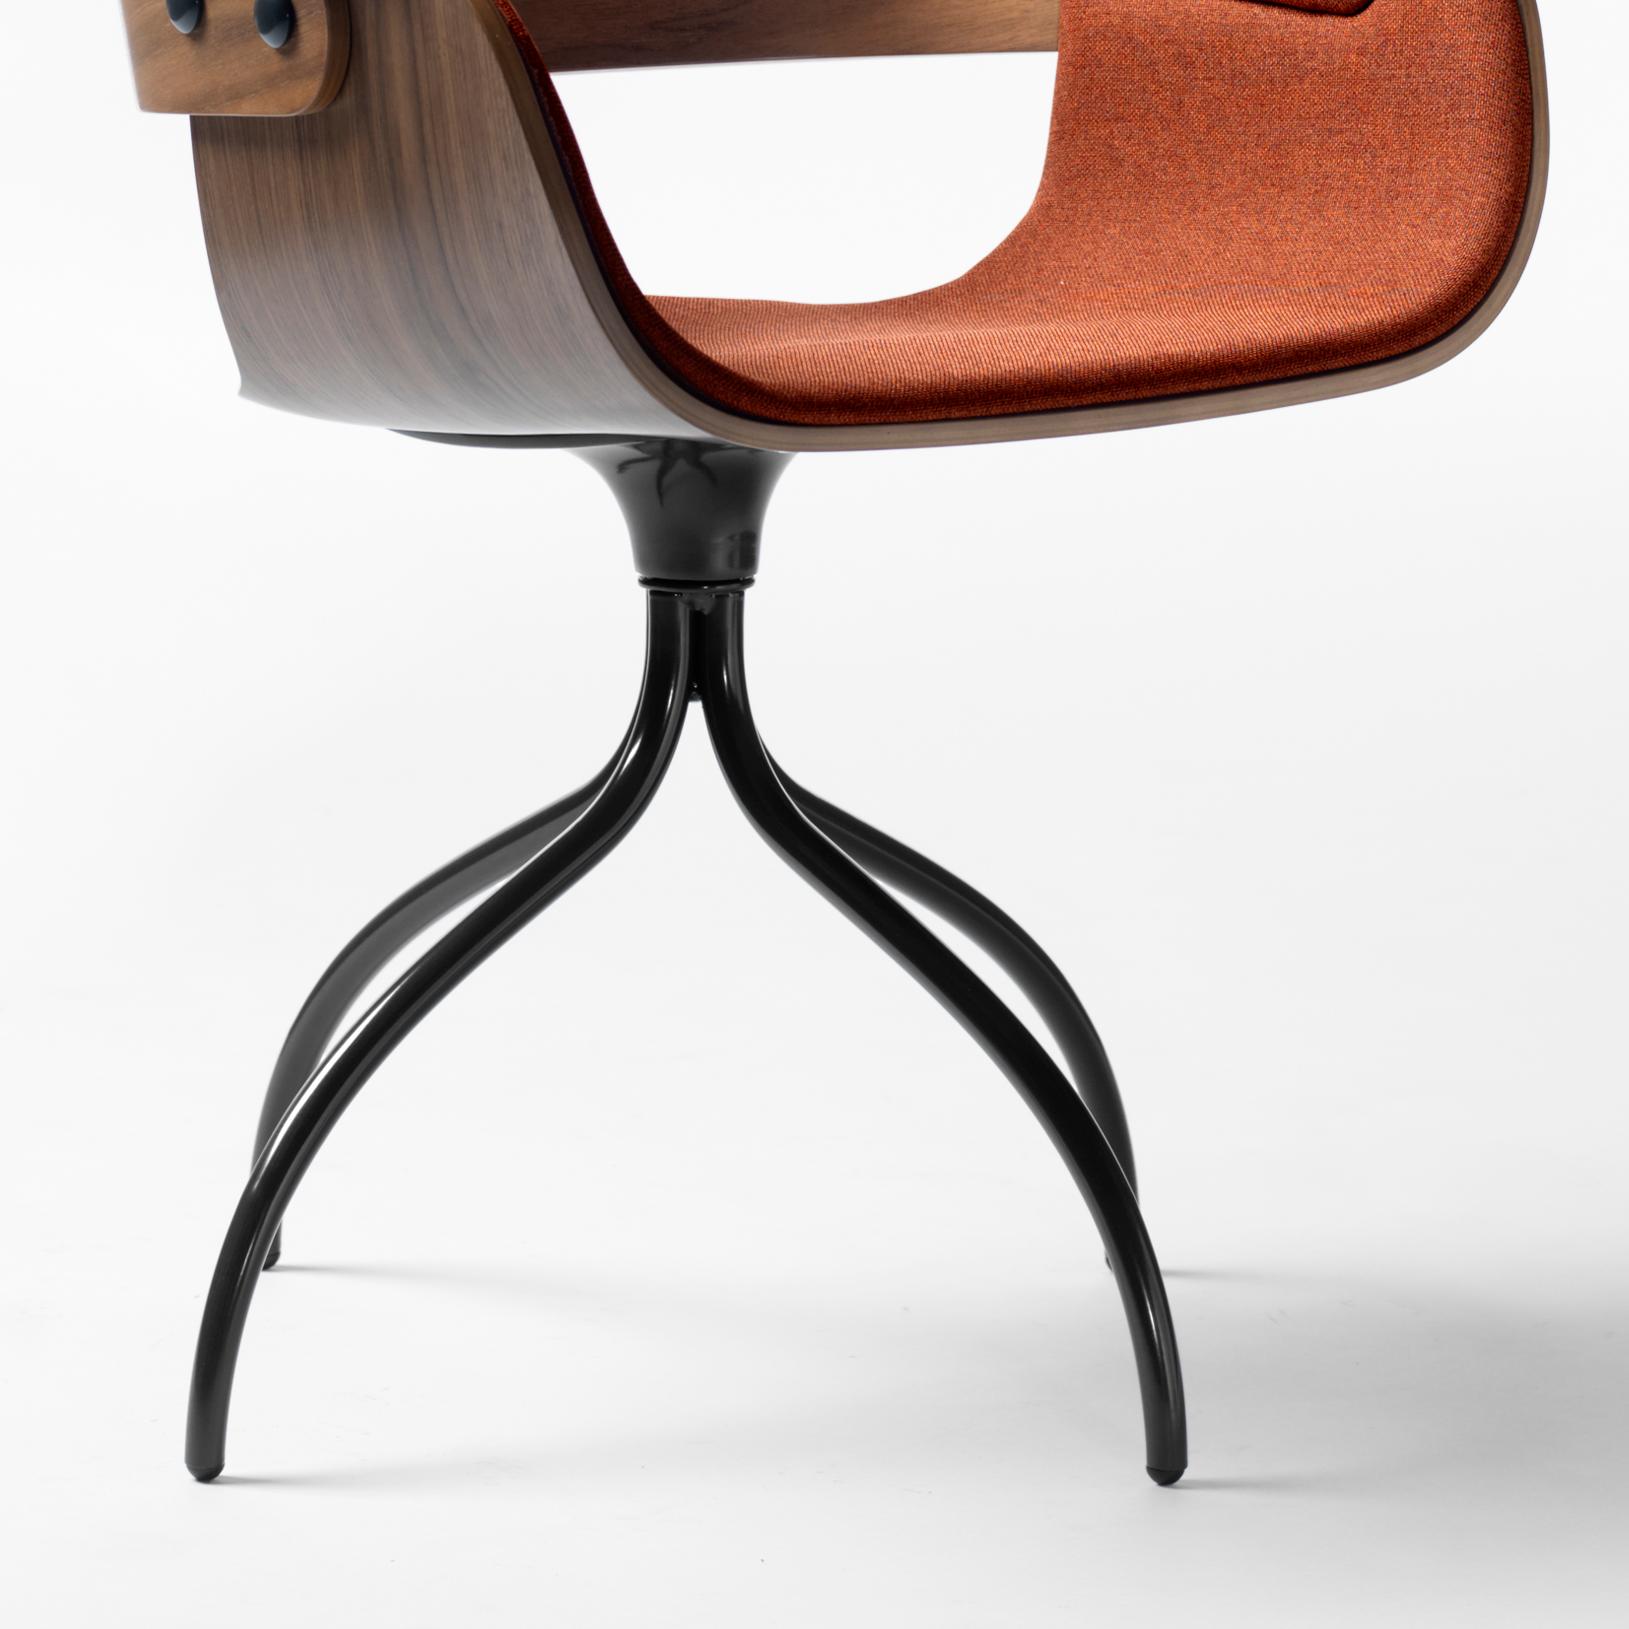 Modern Jaime Hayon, Contemporary, Upholstered Wood Chair Showtime by BD Barcelona